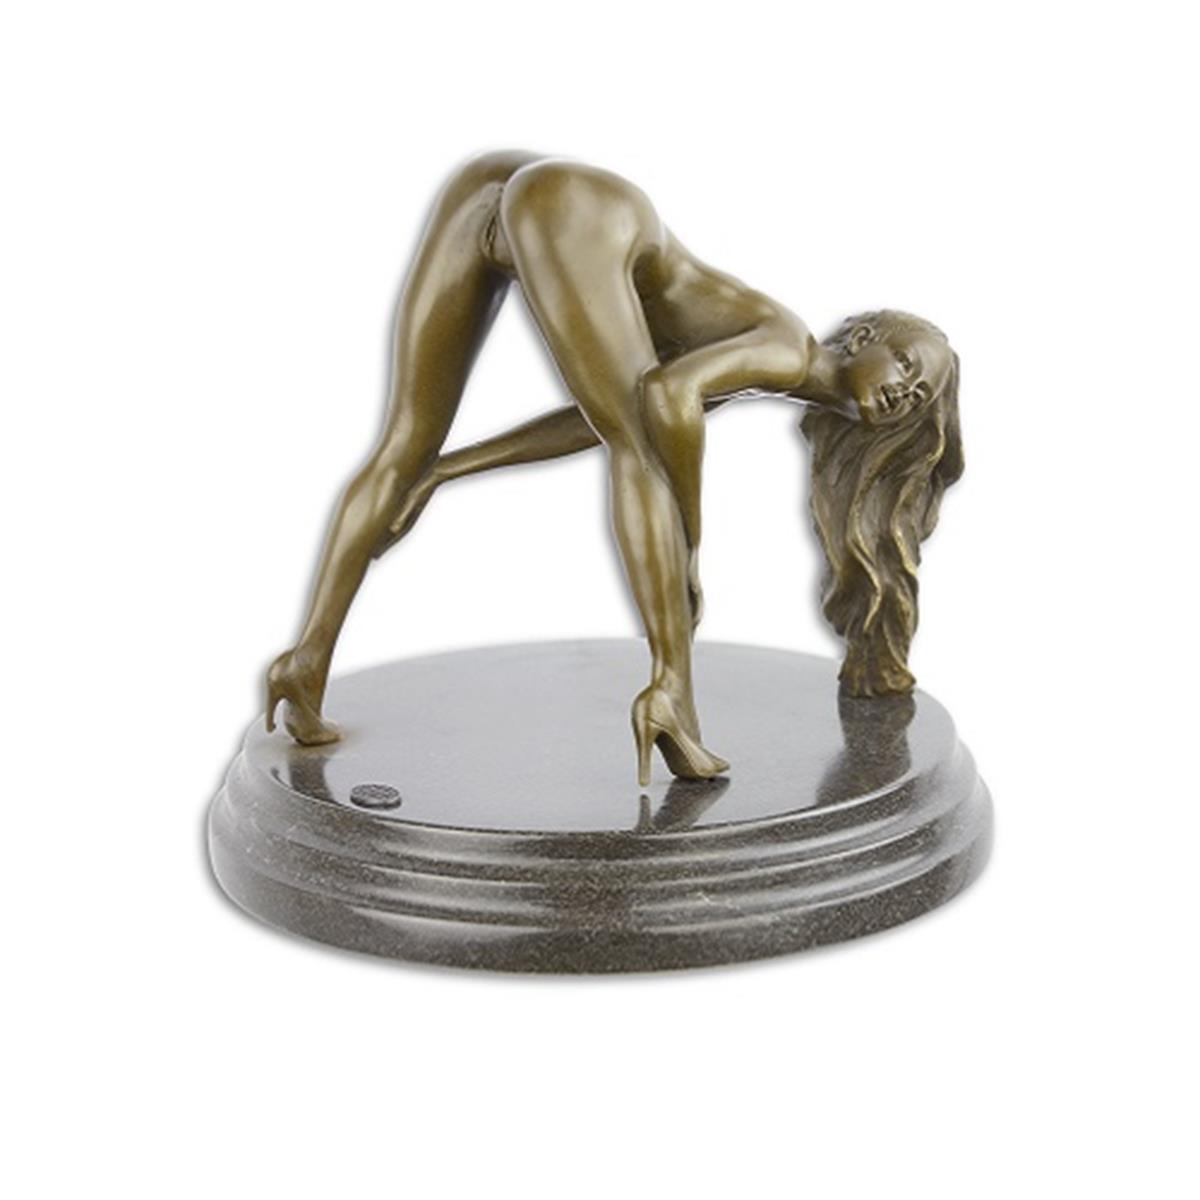 AN EROTIC BRONZE SCULPTURE OF A FEMALE NUDE BENDING OVER